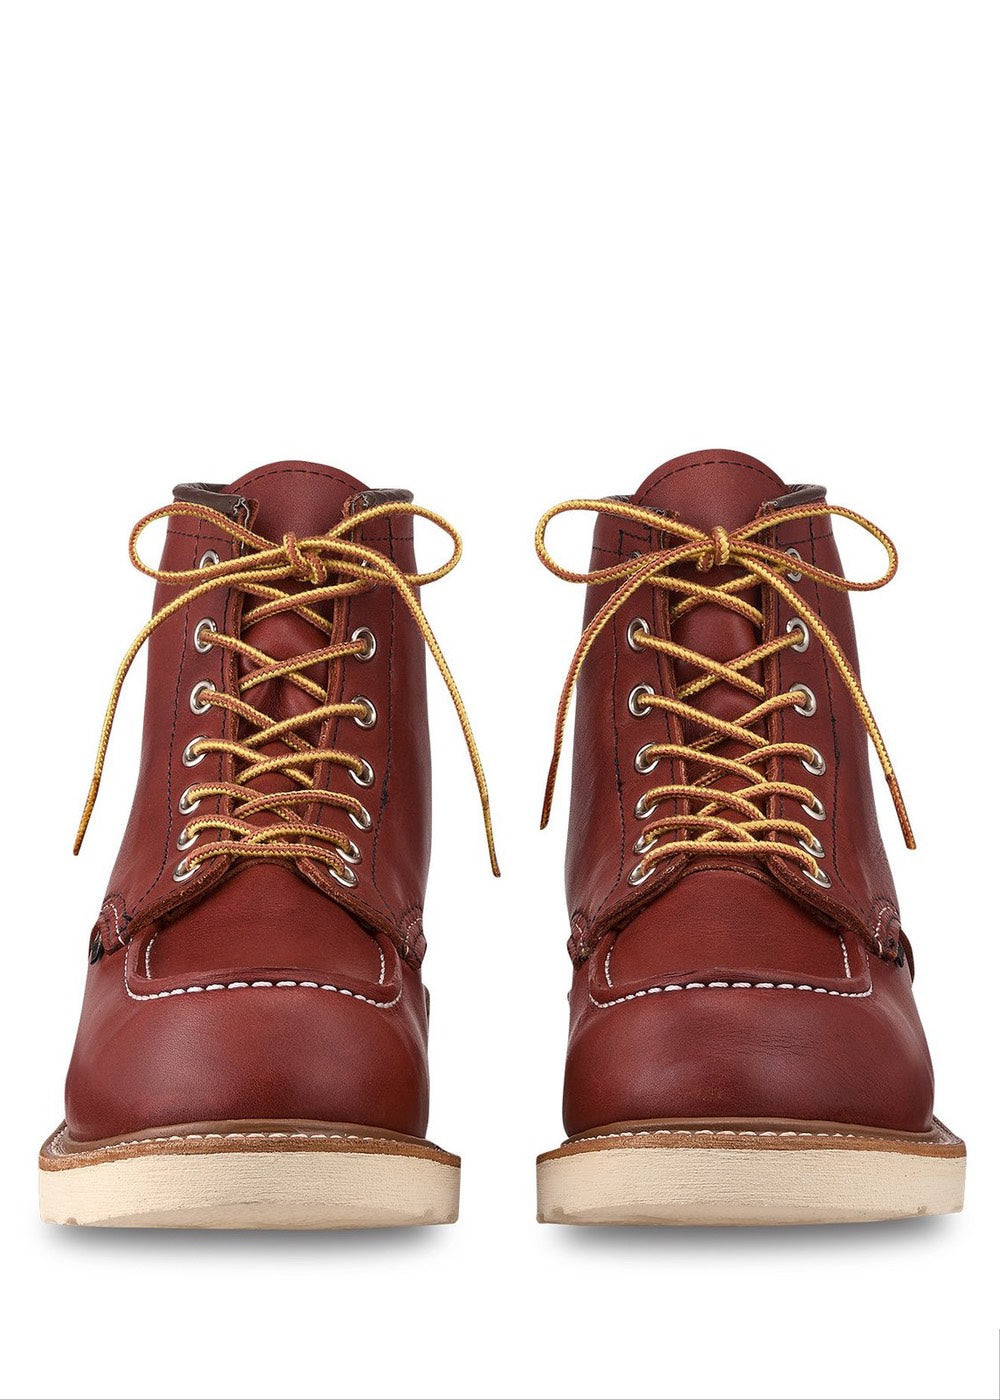 Red Wing 8864 Gore-Tex Moc Toe Russet Taos - Mildblend Supply Co